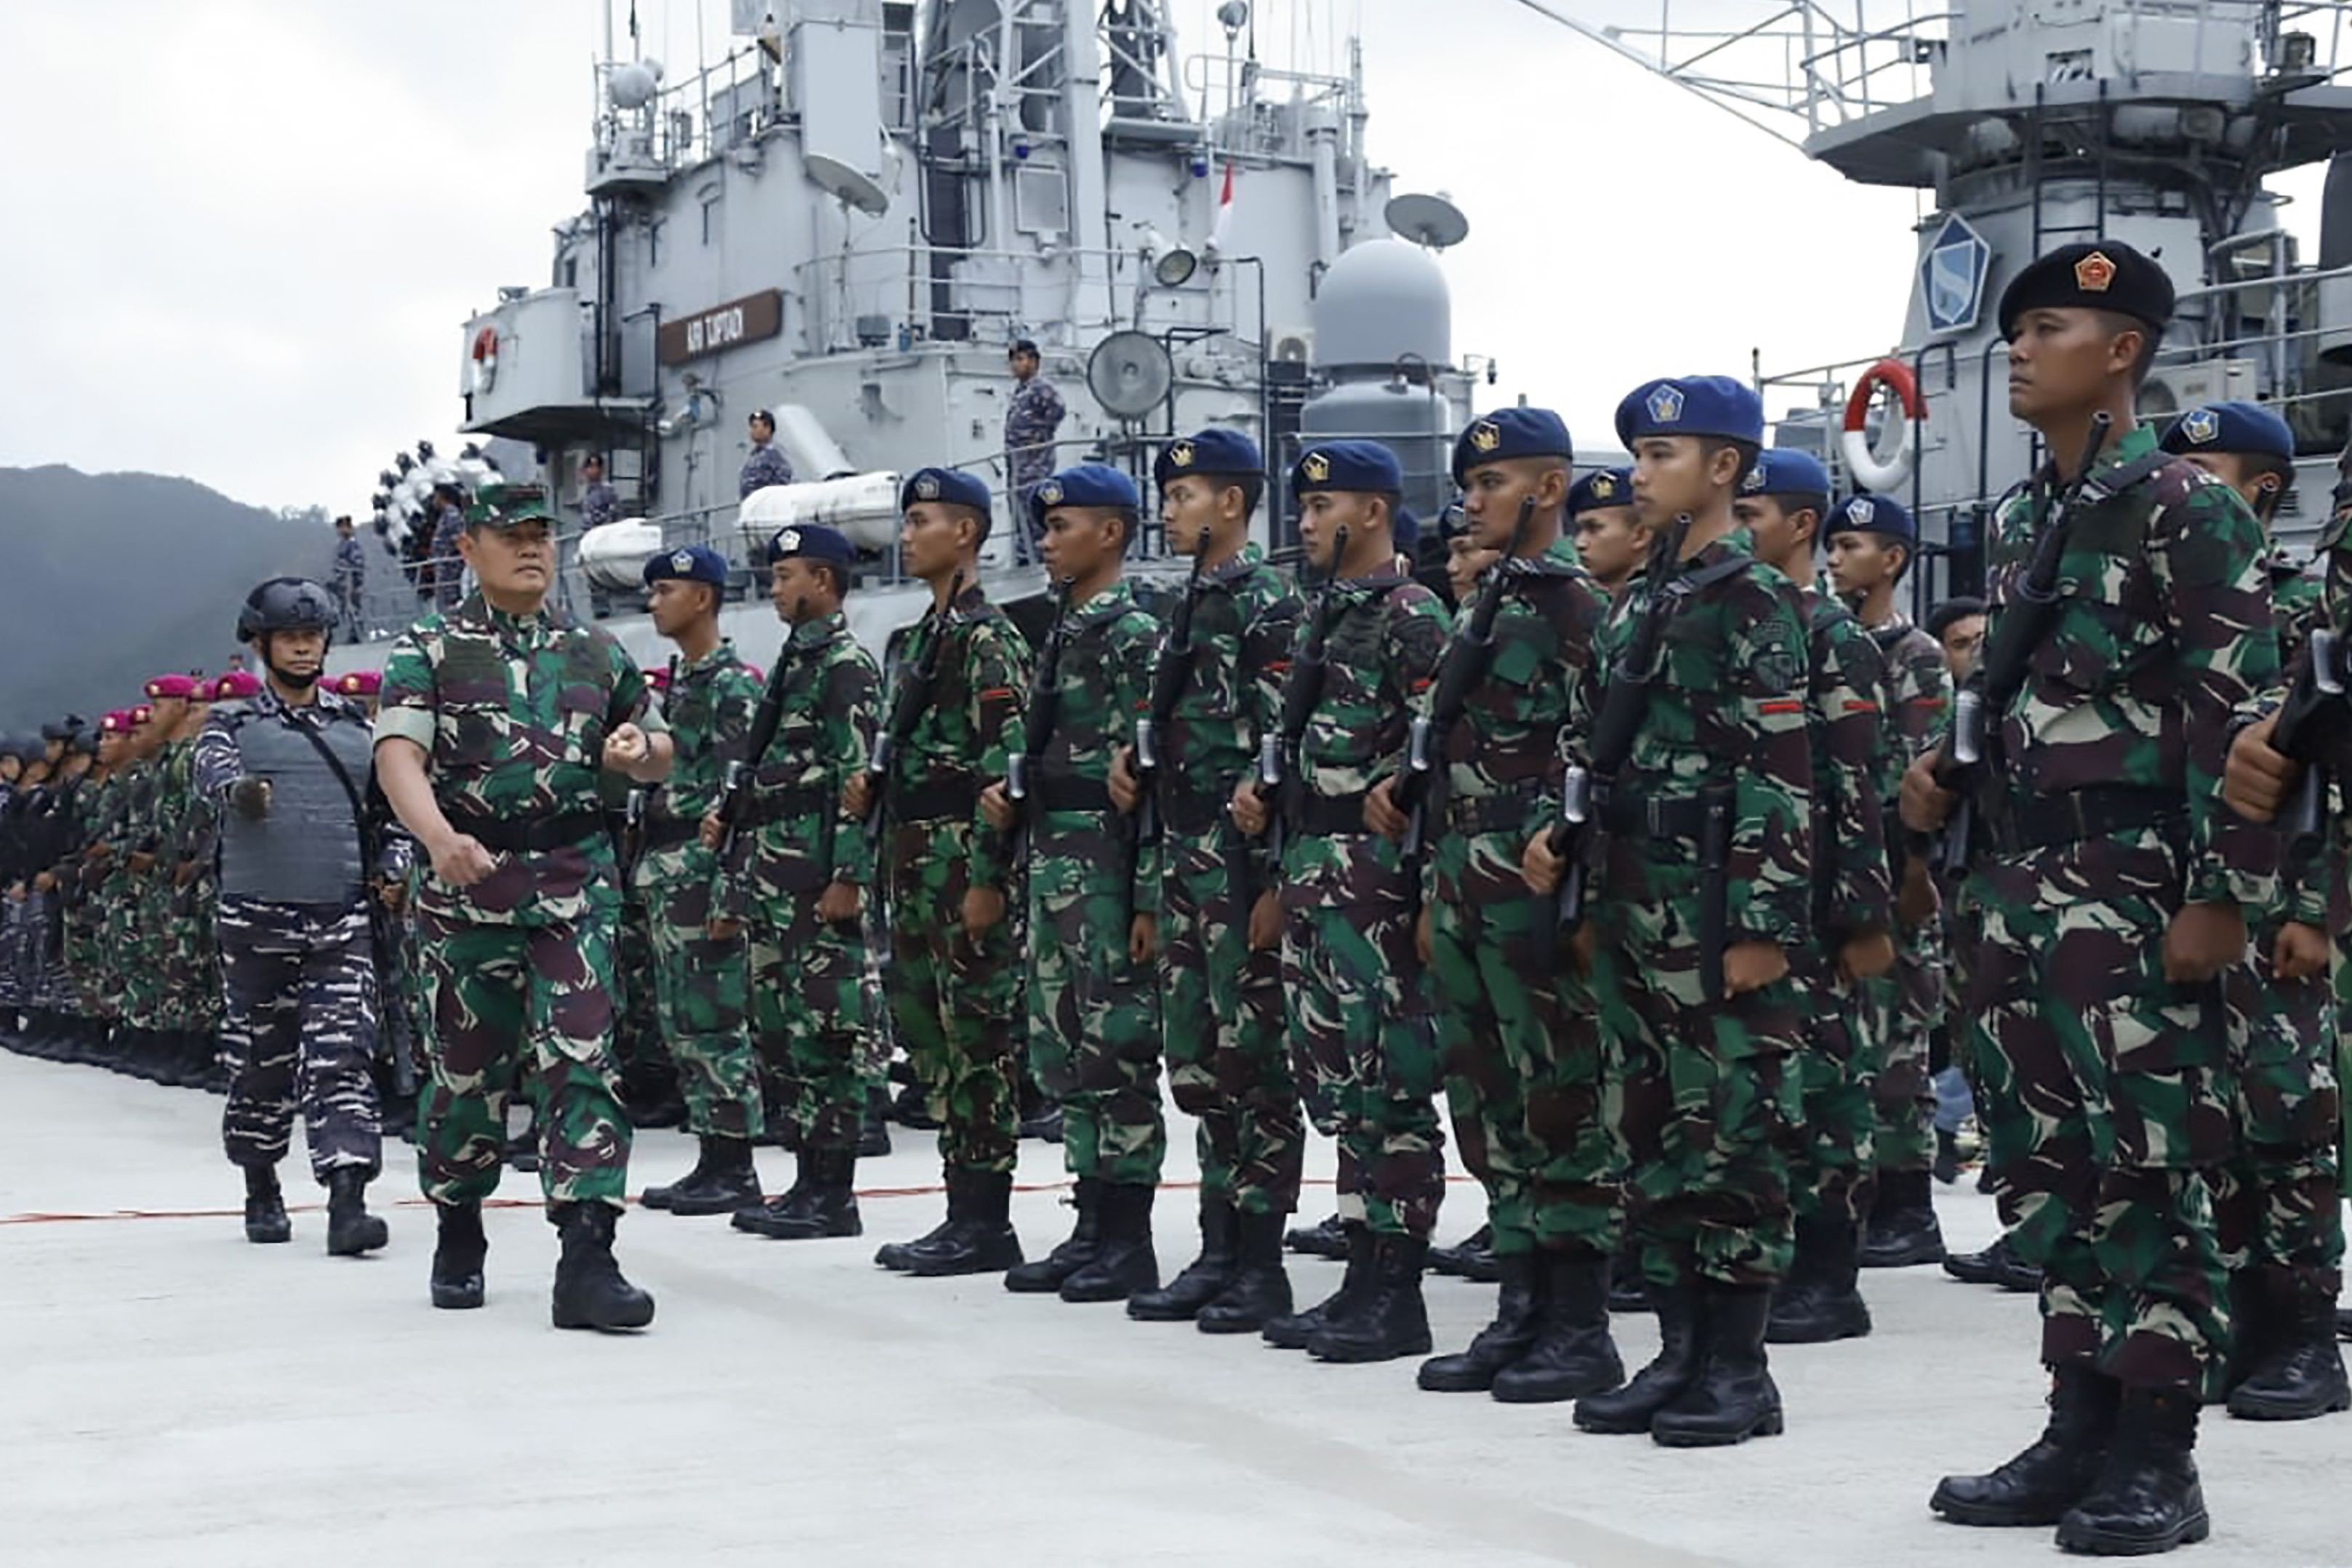 Indonesian troops at Natuna military base in the Riau islands. Photo: Handout